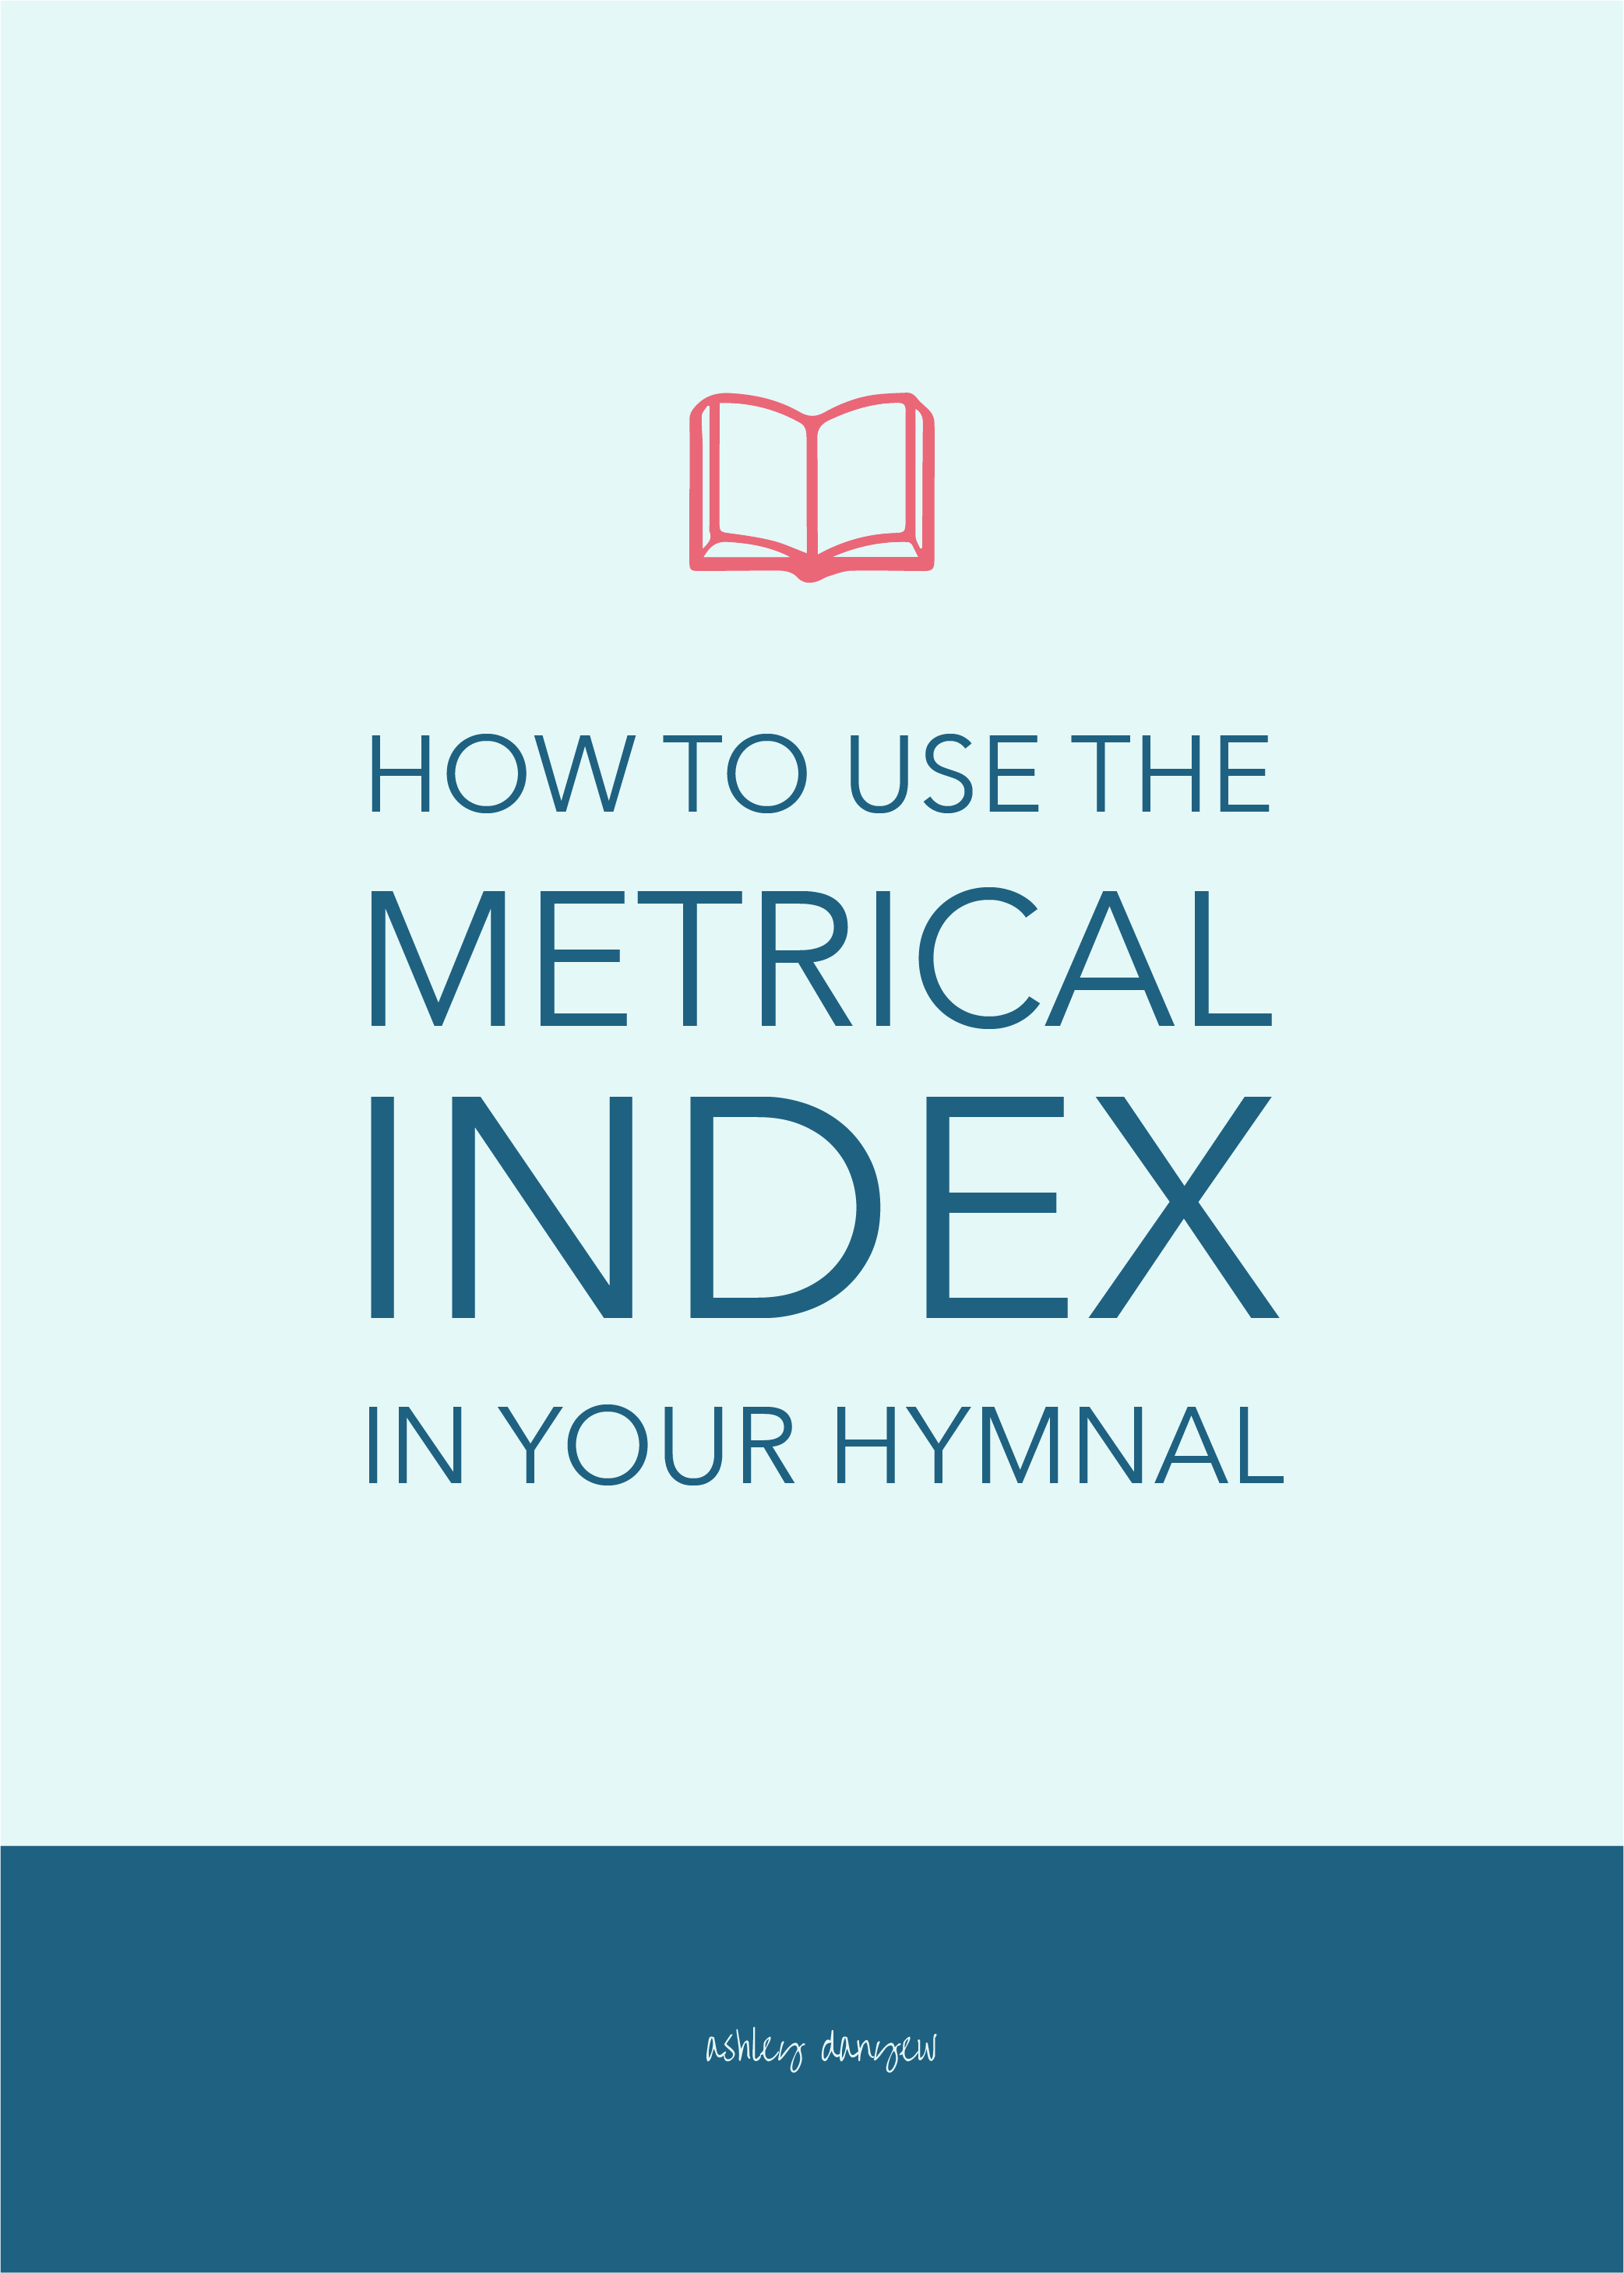 How to Use the Metrical Index in Your Hymnal